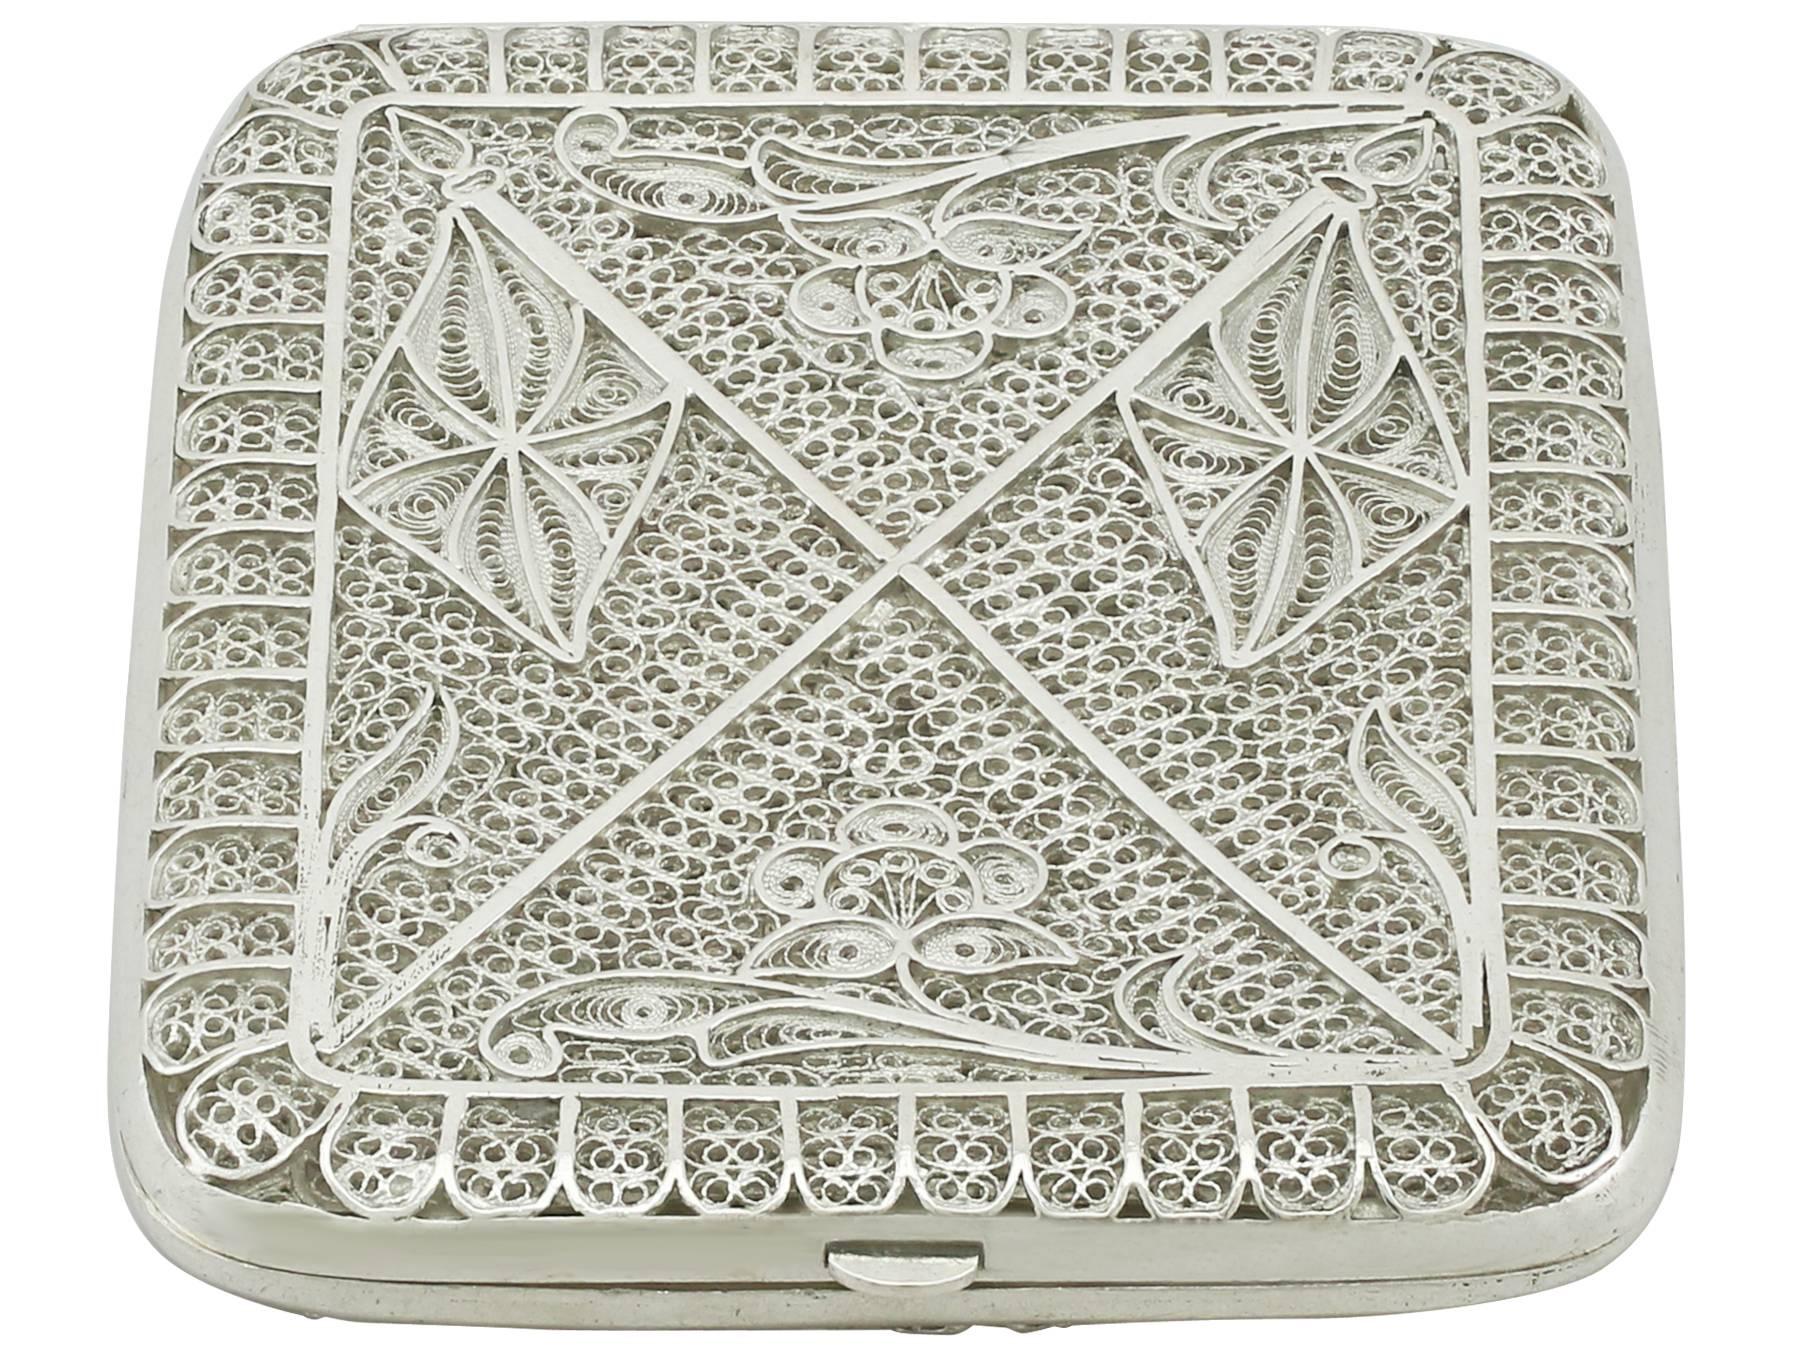 An exceptional, fine and impressive vintage Indian sterling silver cigarette case with British military interest; an addition to our diverse Asian silverware collection.

This exceptional vintage Indian silver cigarette case has a rectangular